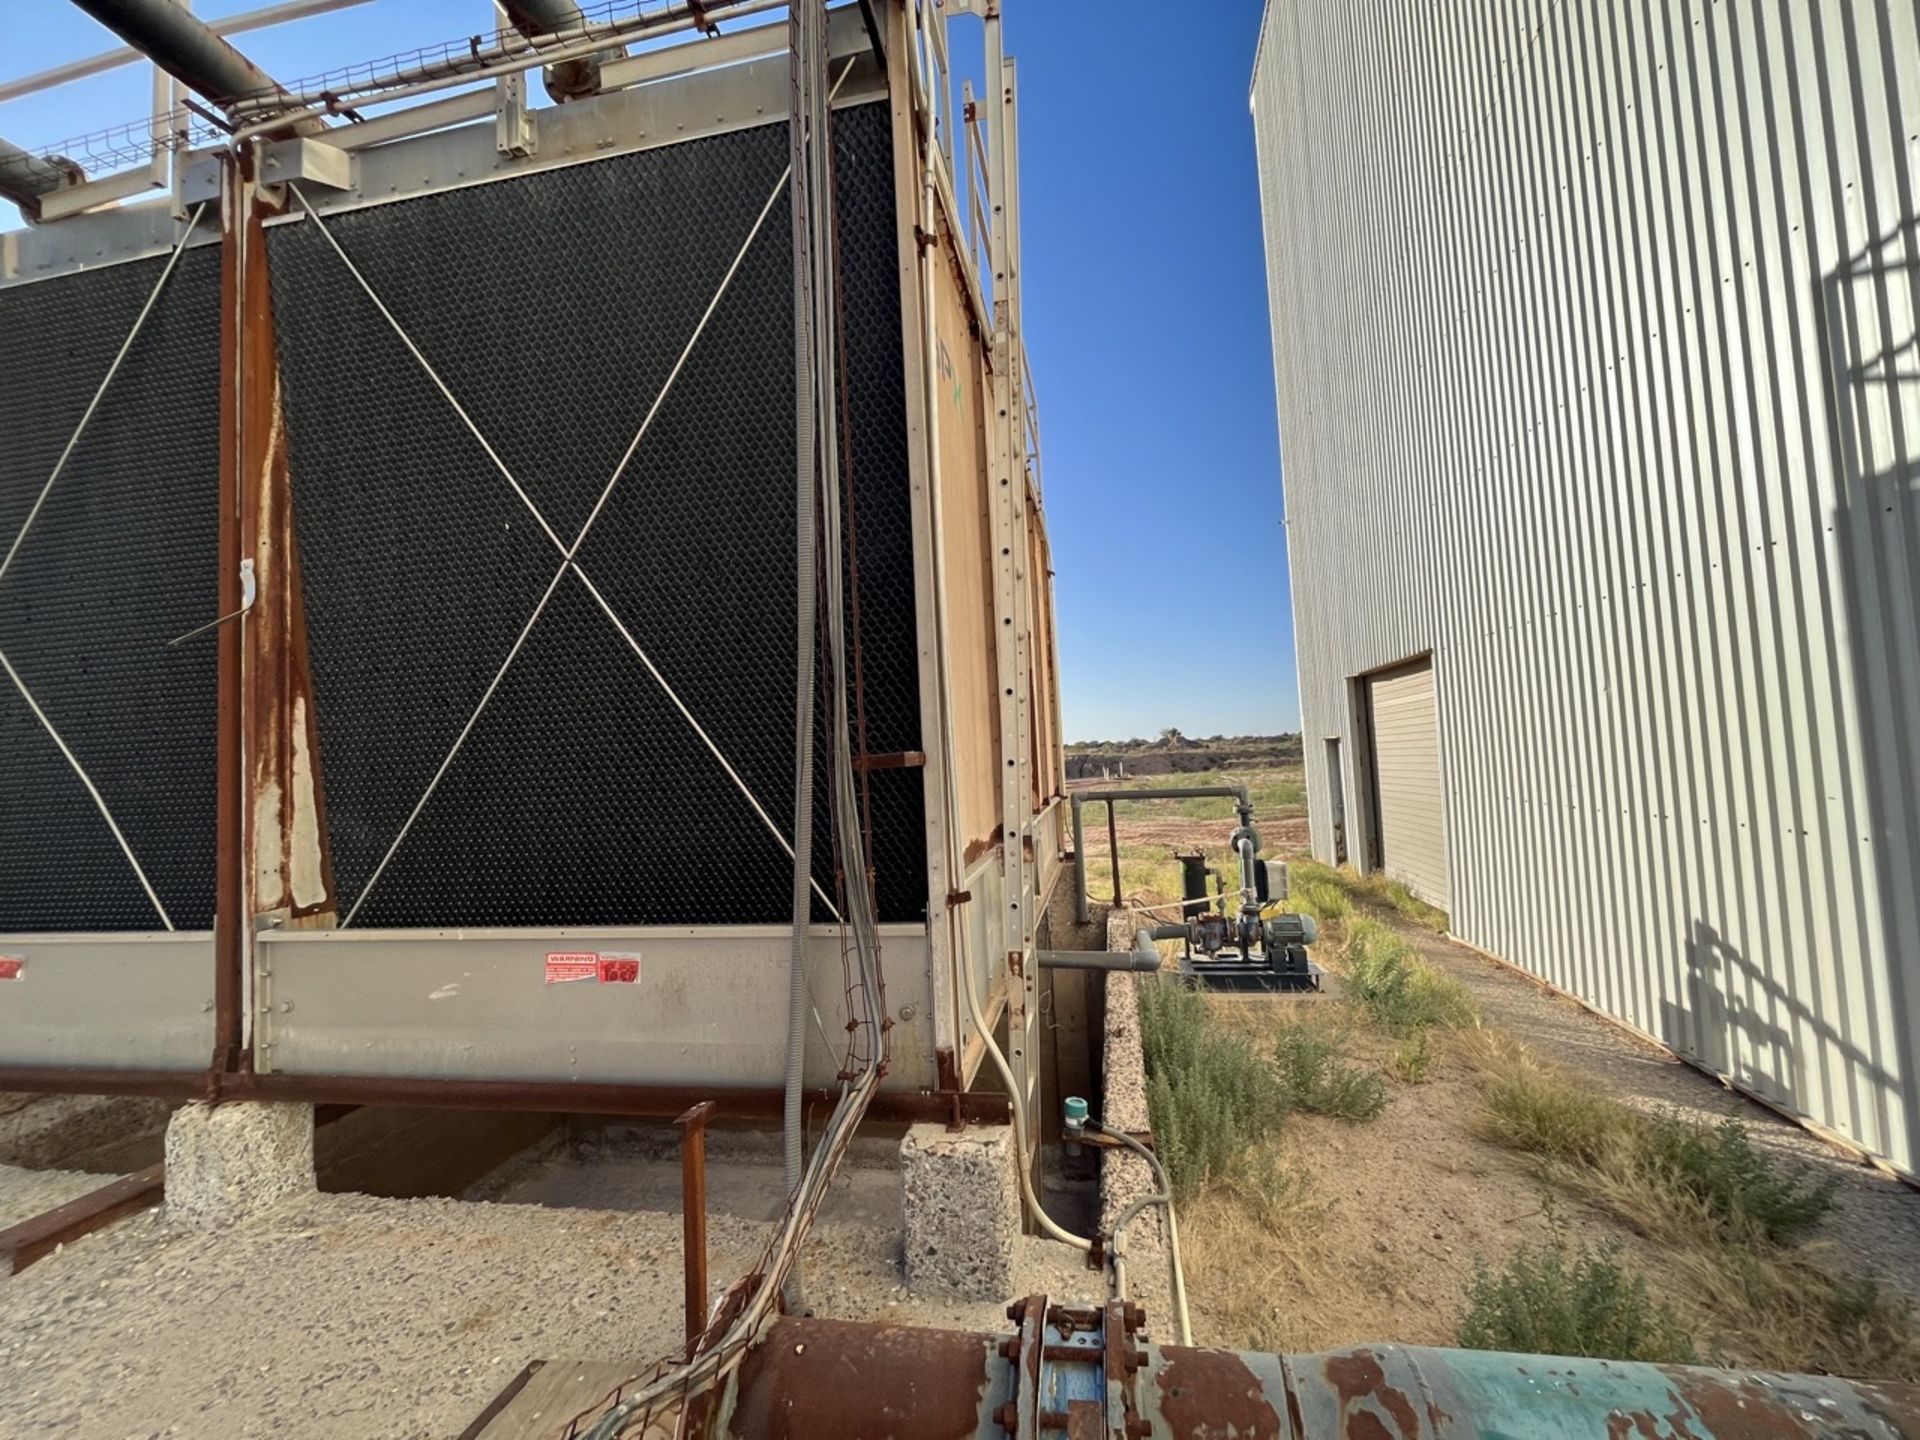 SPX Marley Cooling Tower, Model NC8403TAN2BGF, Series 10090866-A2-NC8403BG-14, Year 2009; 1 cell 25 - Image 9 of 23